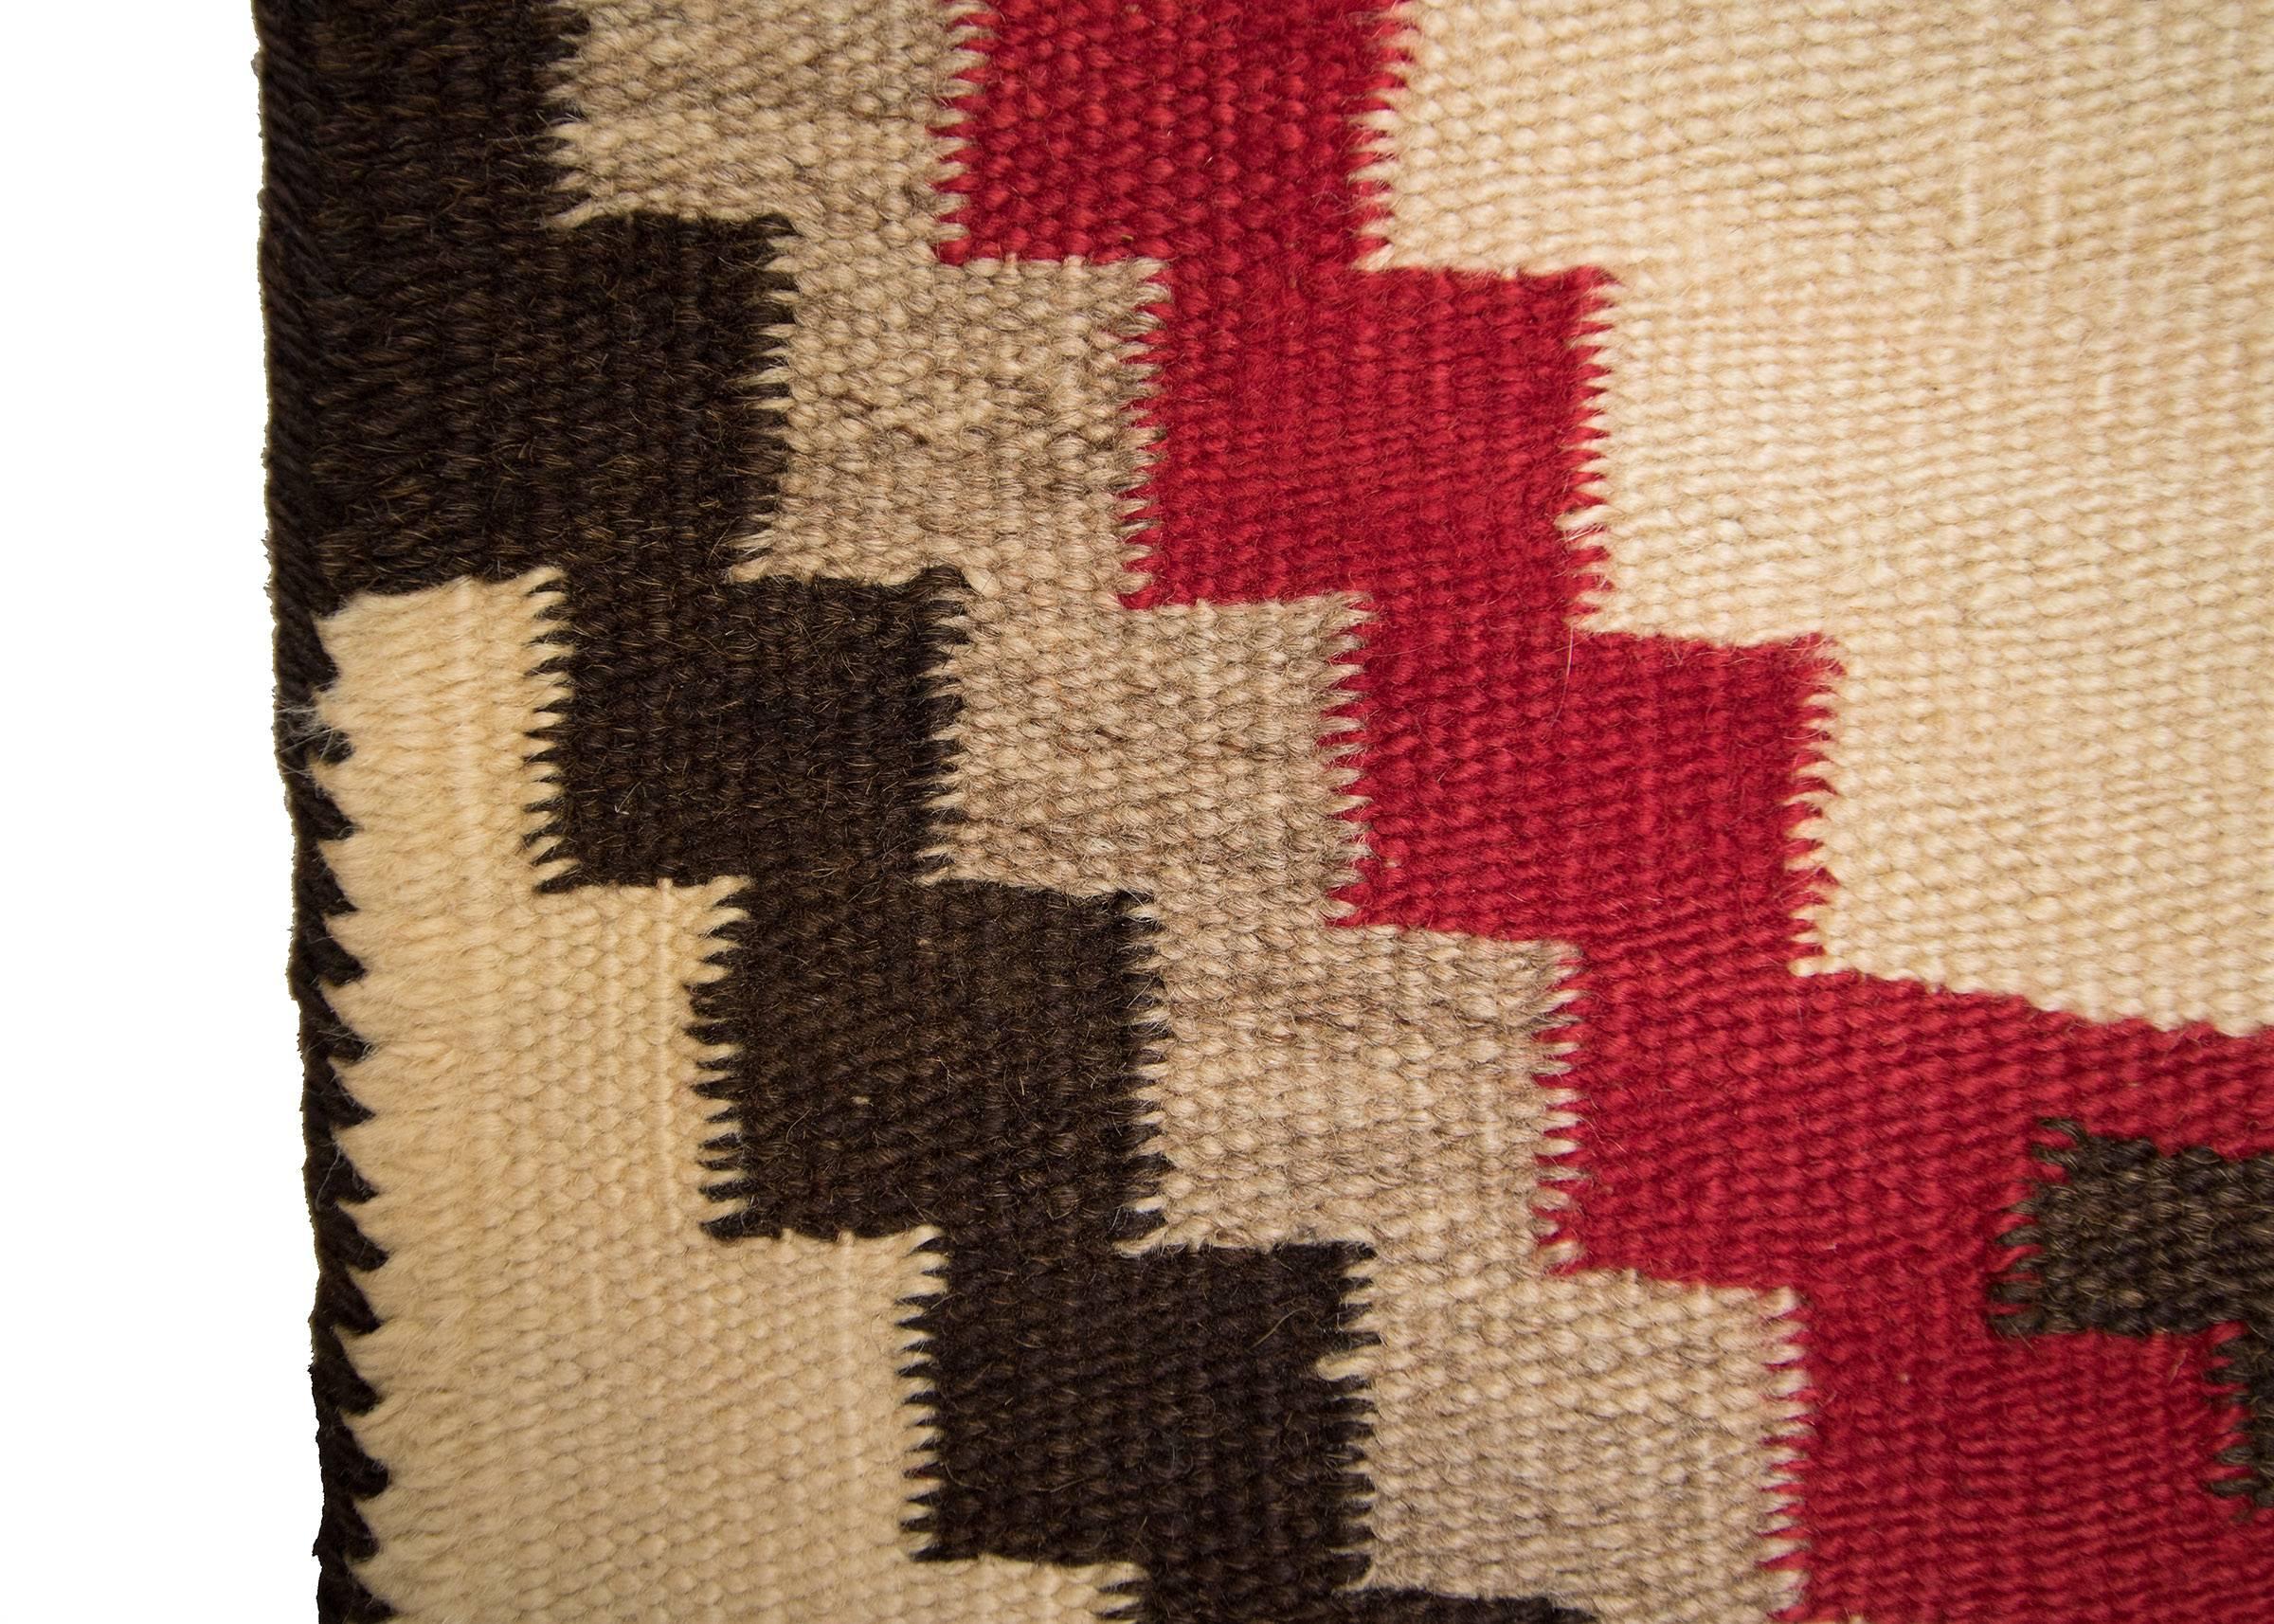 American Vintage Navajo Chiefs Blanket '4th Phase Variant', Early 20th Century